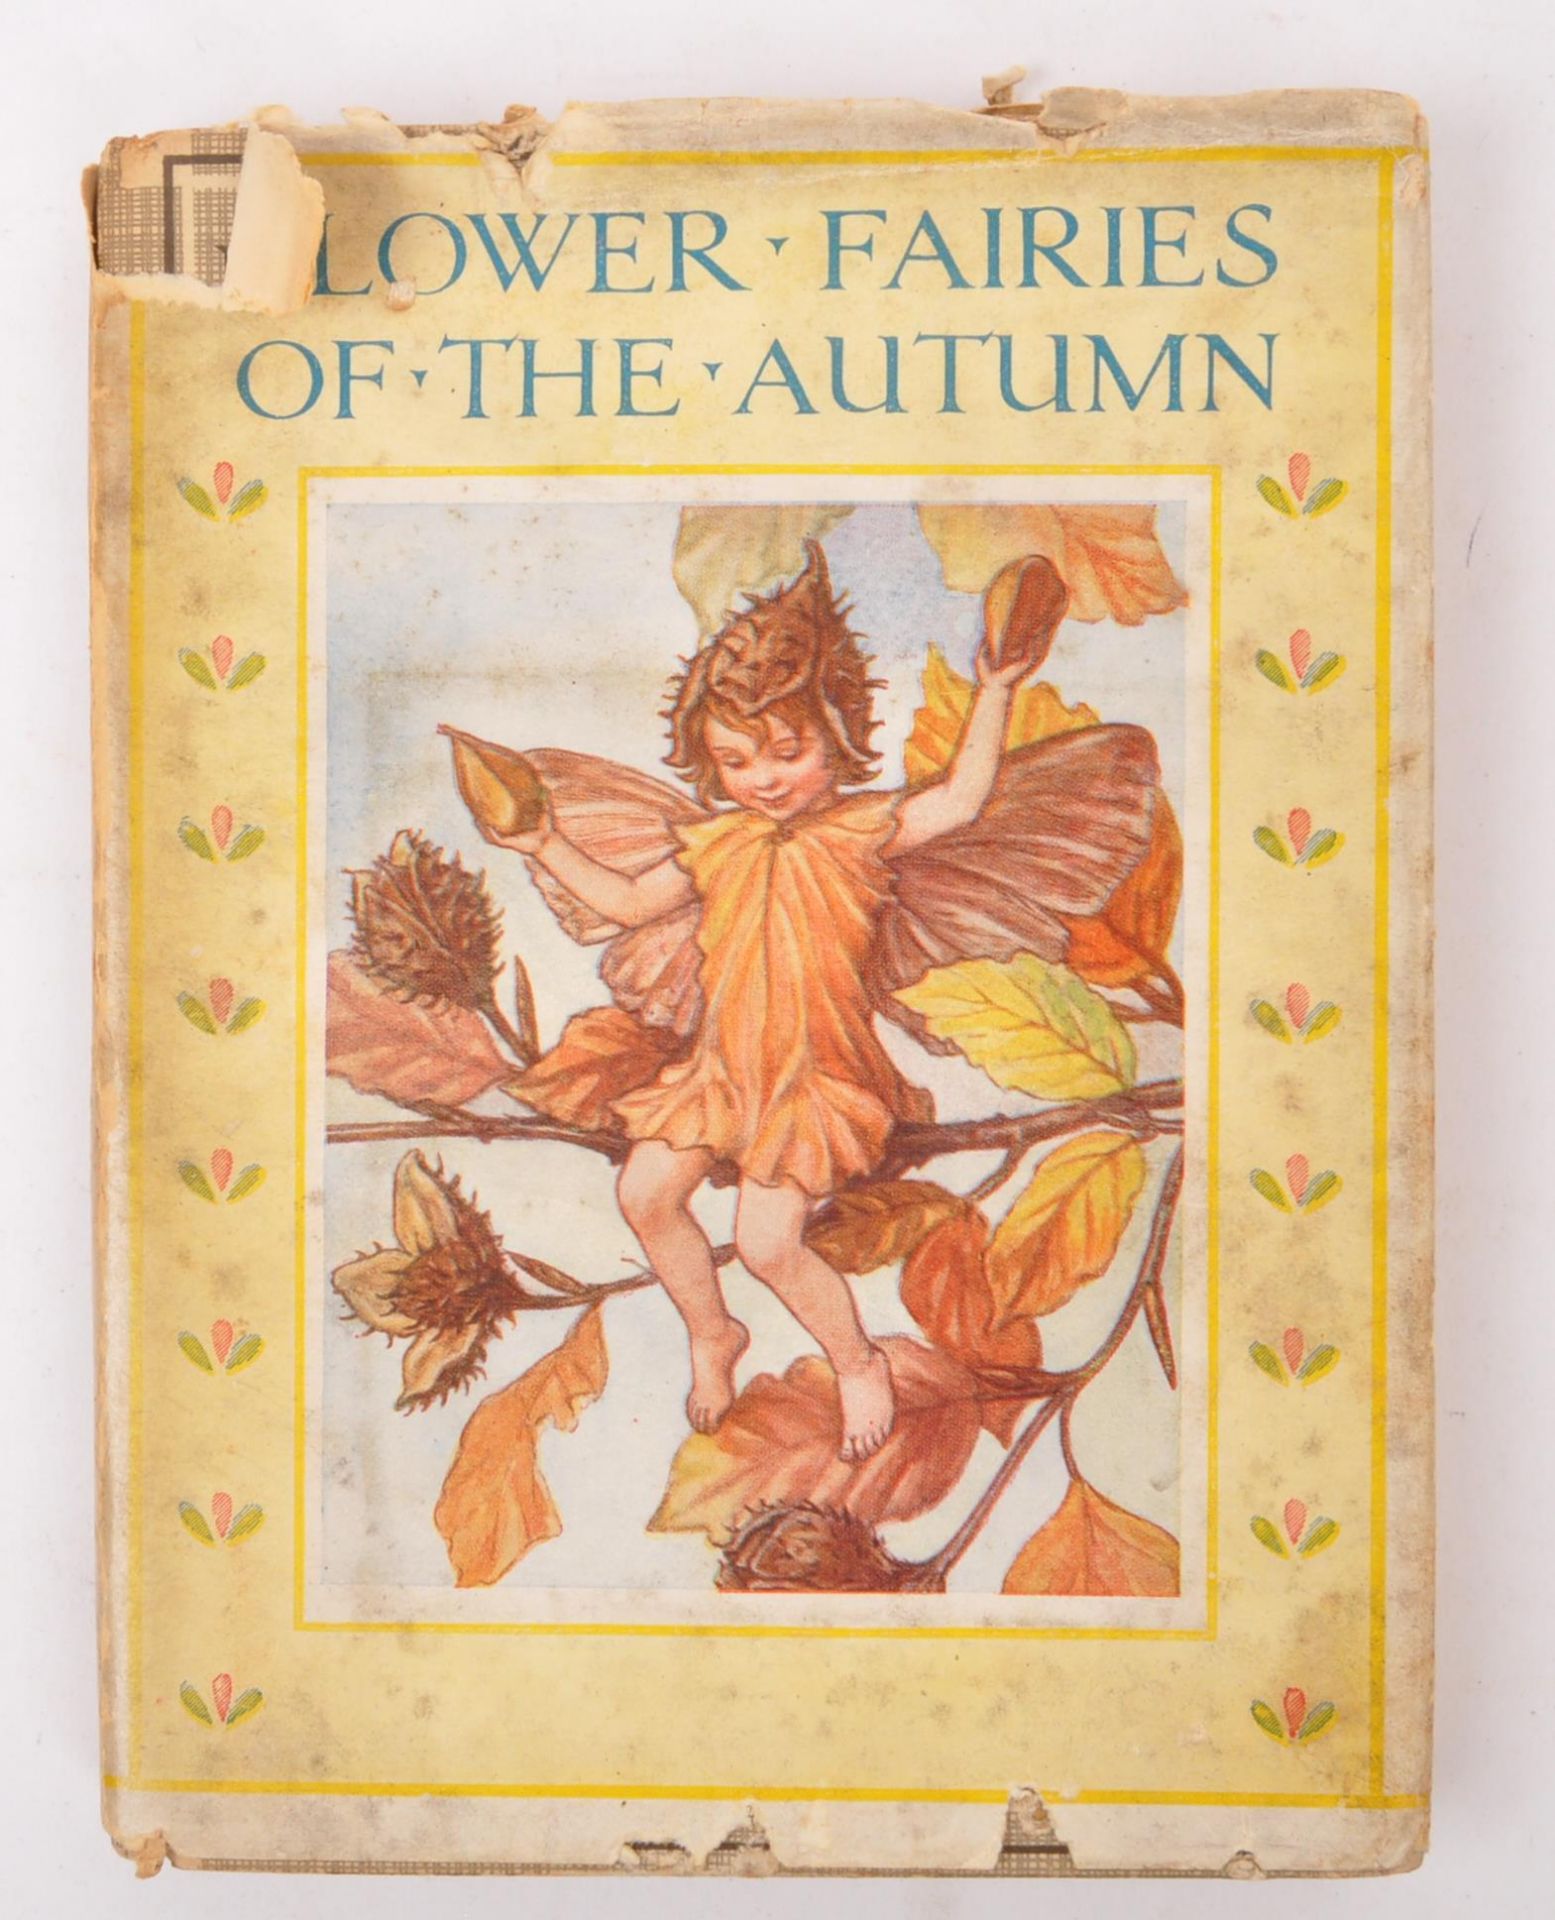 1923 FLOWER FAIRIES OF THE AUTUMN FIRST EDITION SMALL BOOK